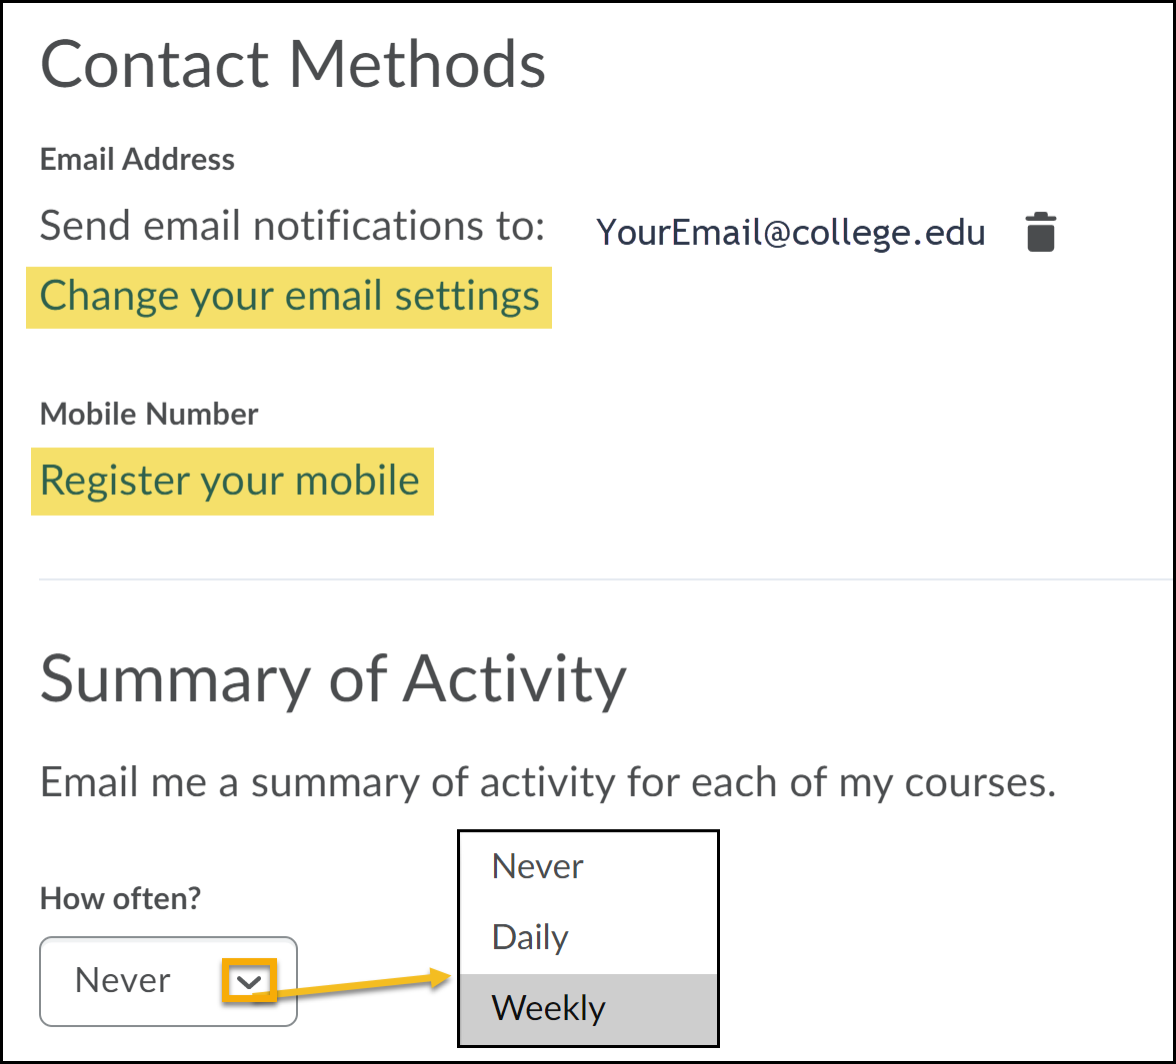 Change your email settings and Register your mobile. Email summary menu expanded to Never, Daily and Weekly.